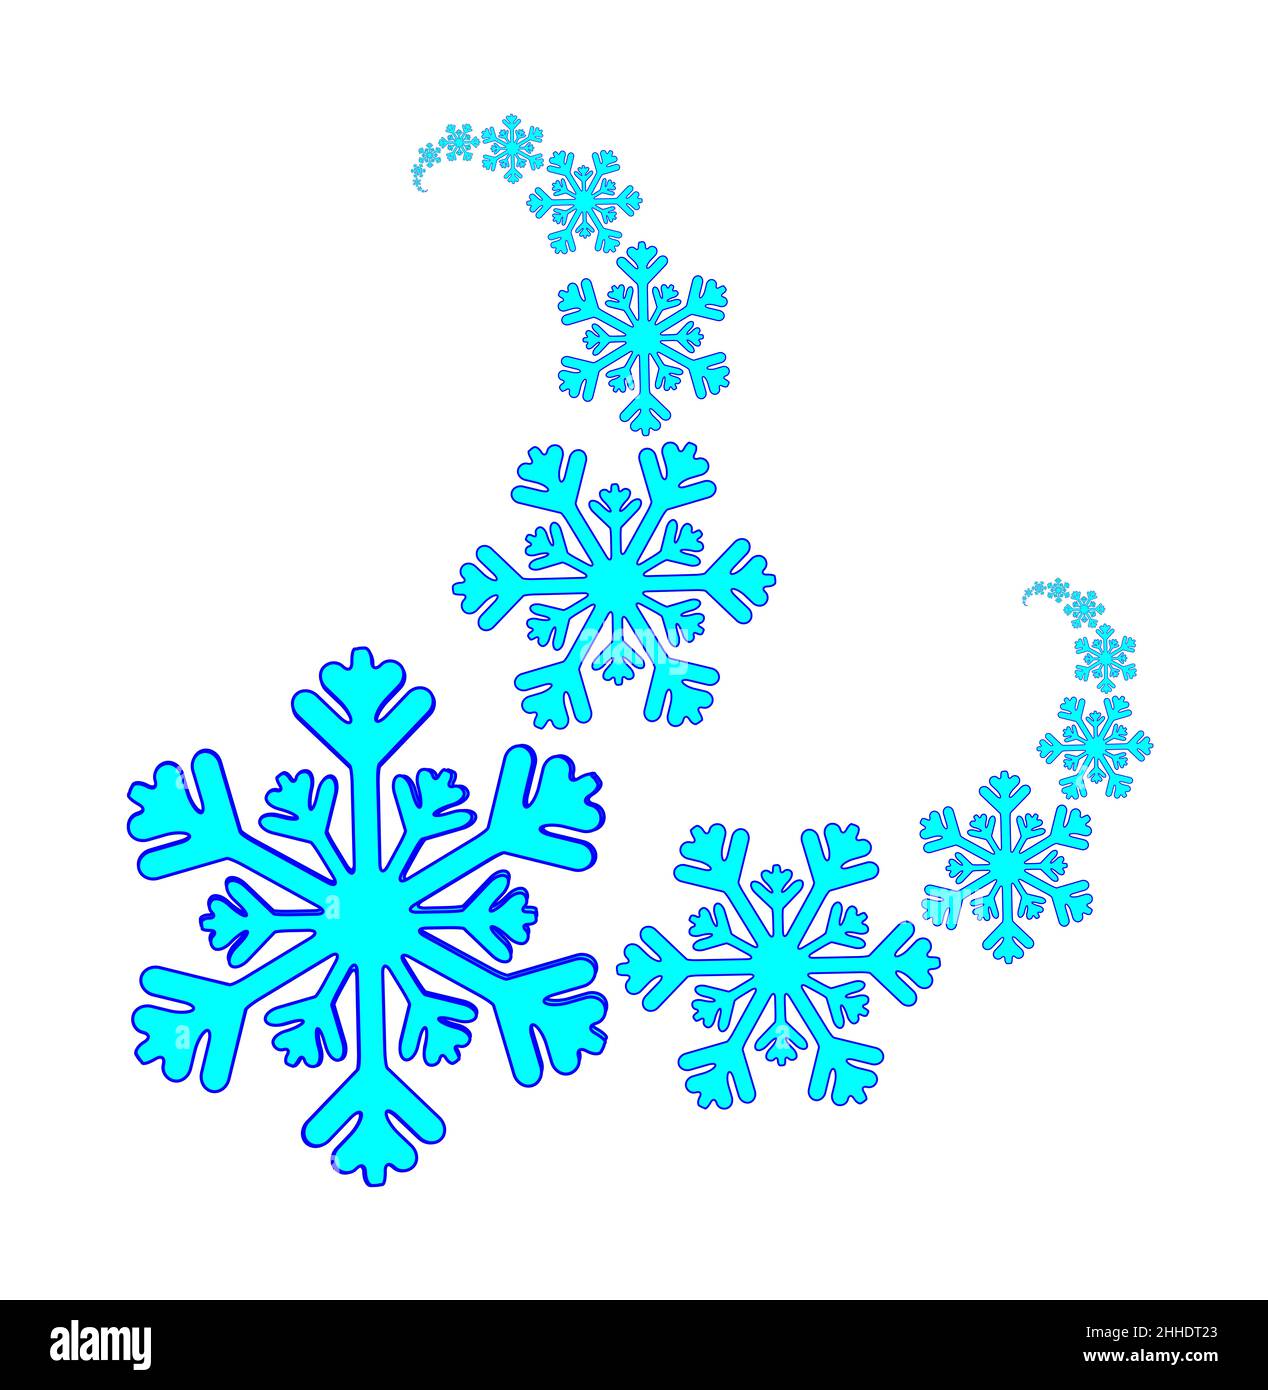 Snow flakes cartoon Cut Out Stock Images & Pictures - Alamy